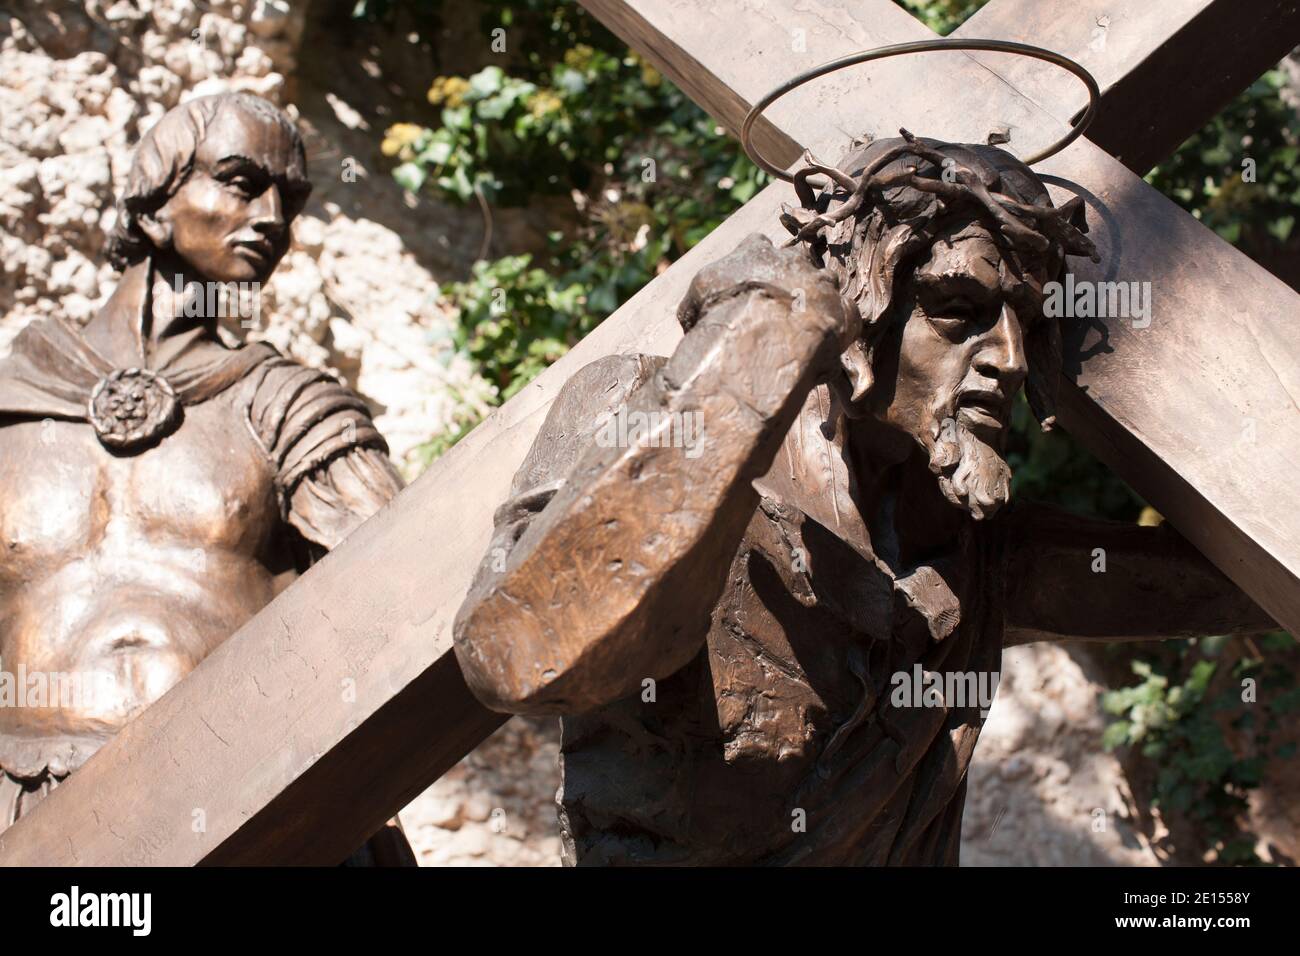 Portrait Of A Christ Figure With Crown Of Thorns And Cross Stock Photo